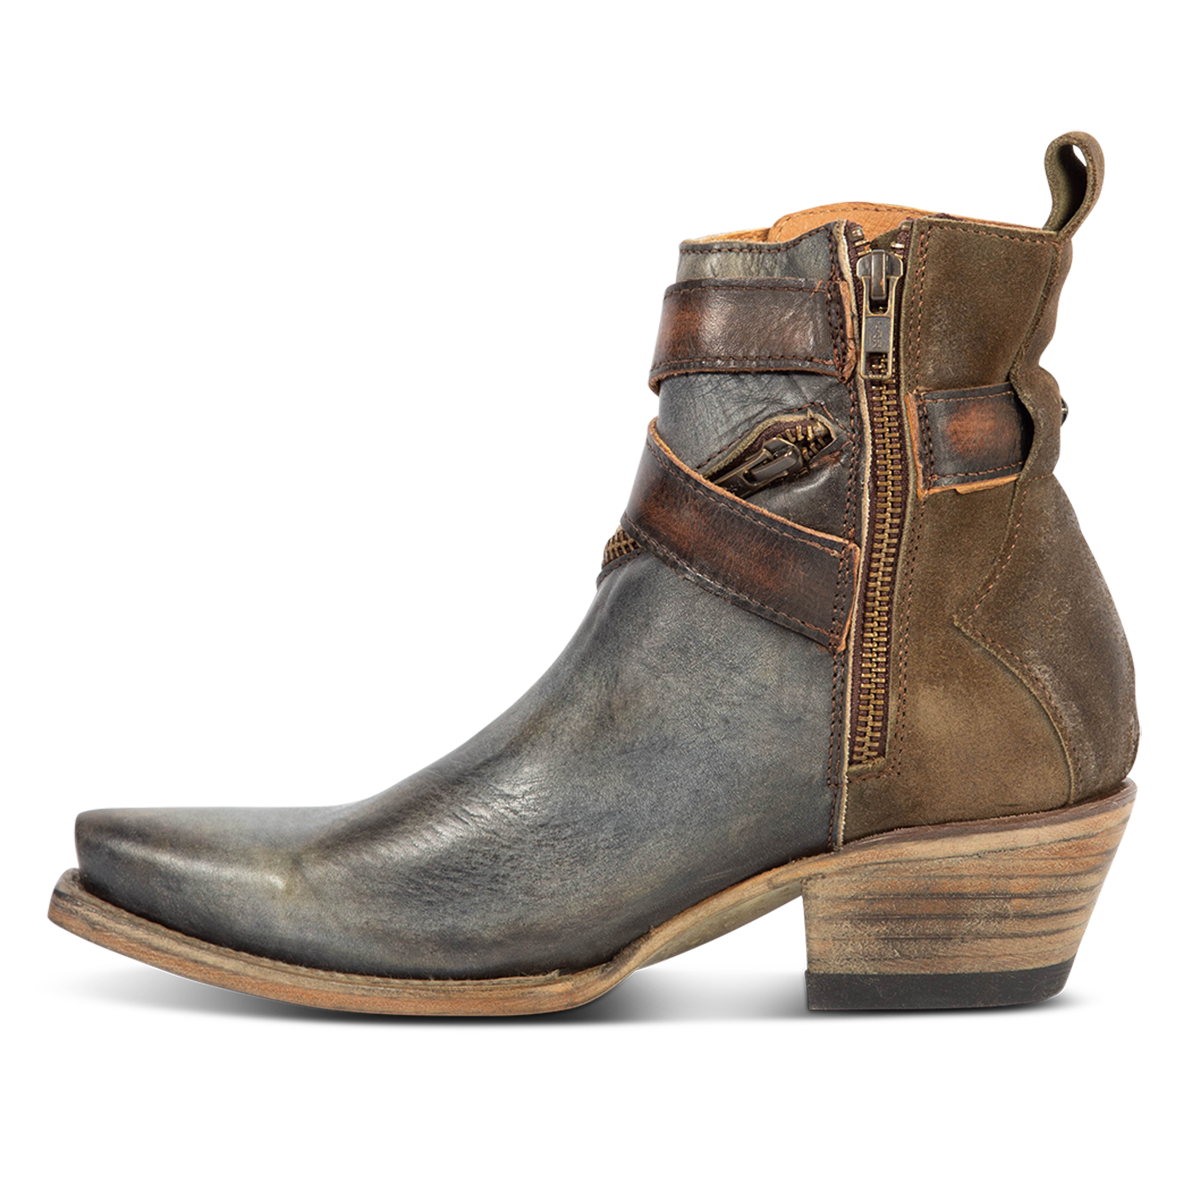 Inside view showing inside zip closure on FREEBIRD women's Whip olive leather western ankle bootie